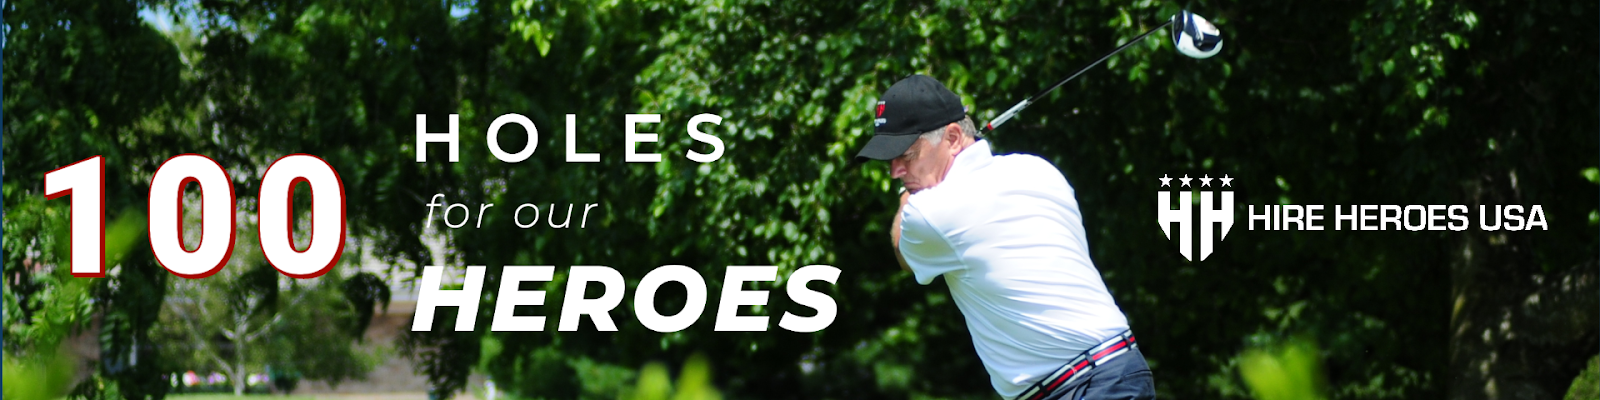 banner for 100 holes for our heroes with man swinging a golf club